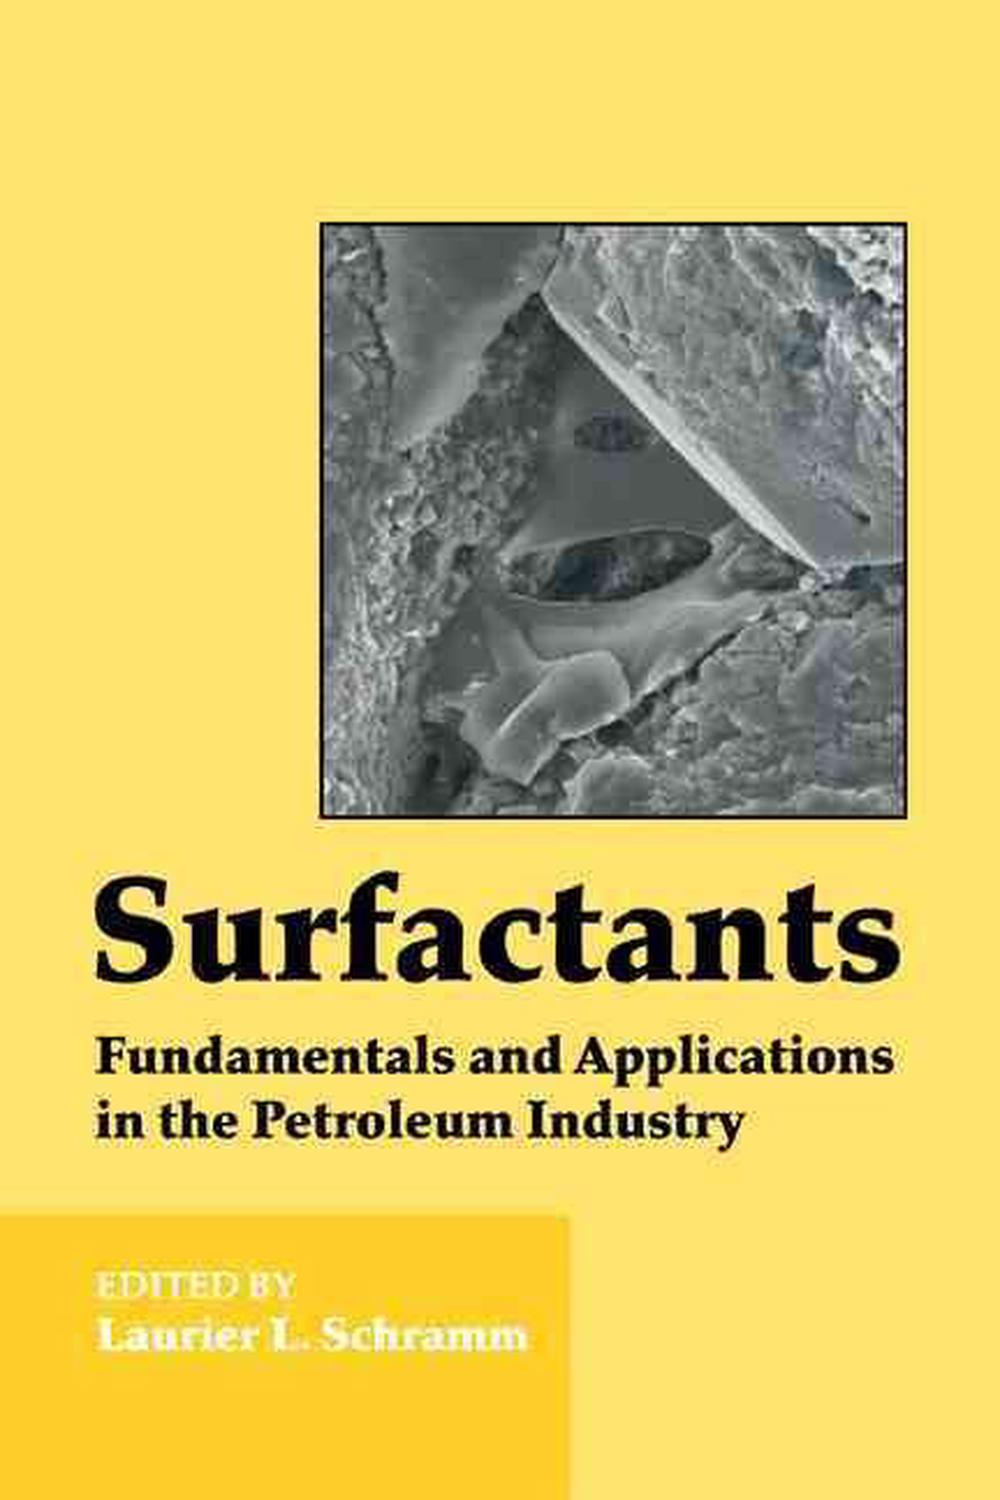 Surfactants Fundamentals and Applications in the Petroleum Industry